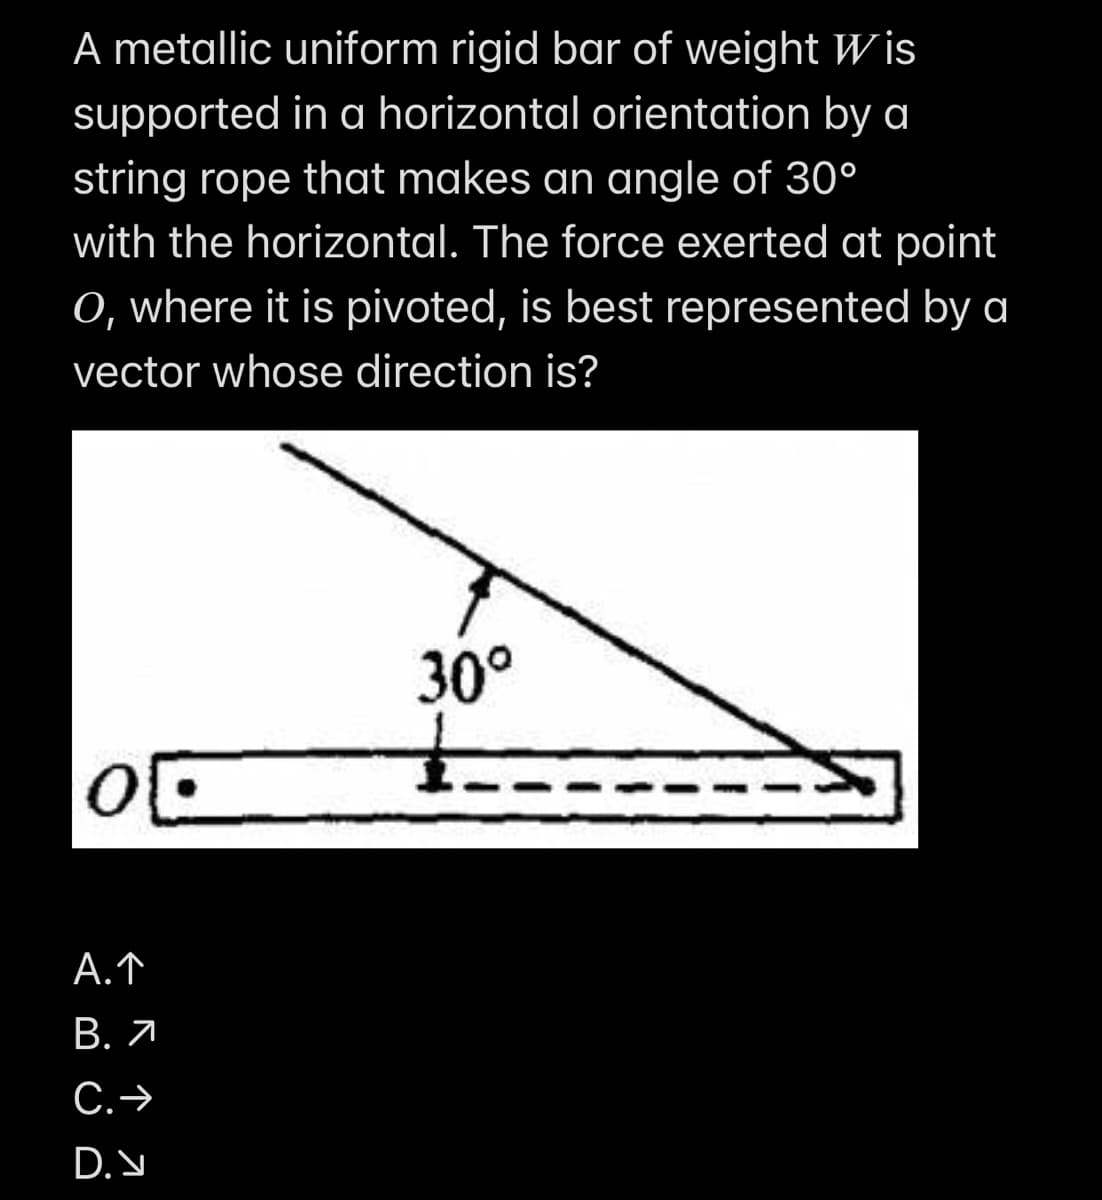 A metallic uniform rigid bar of weight Wis
supported in a horizontal orientation by a
string rope that makes an angle of 30°
with the horizontal. The force exerted at point
O, where it is pivoted, is best represented by a
vector whose direction is?
30°
1.
01.
A. ↑
B. 7
C. →
D.